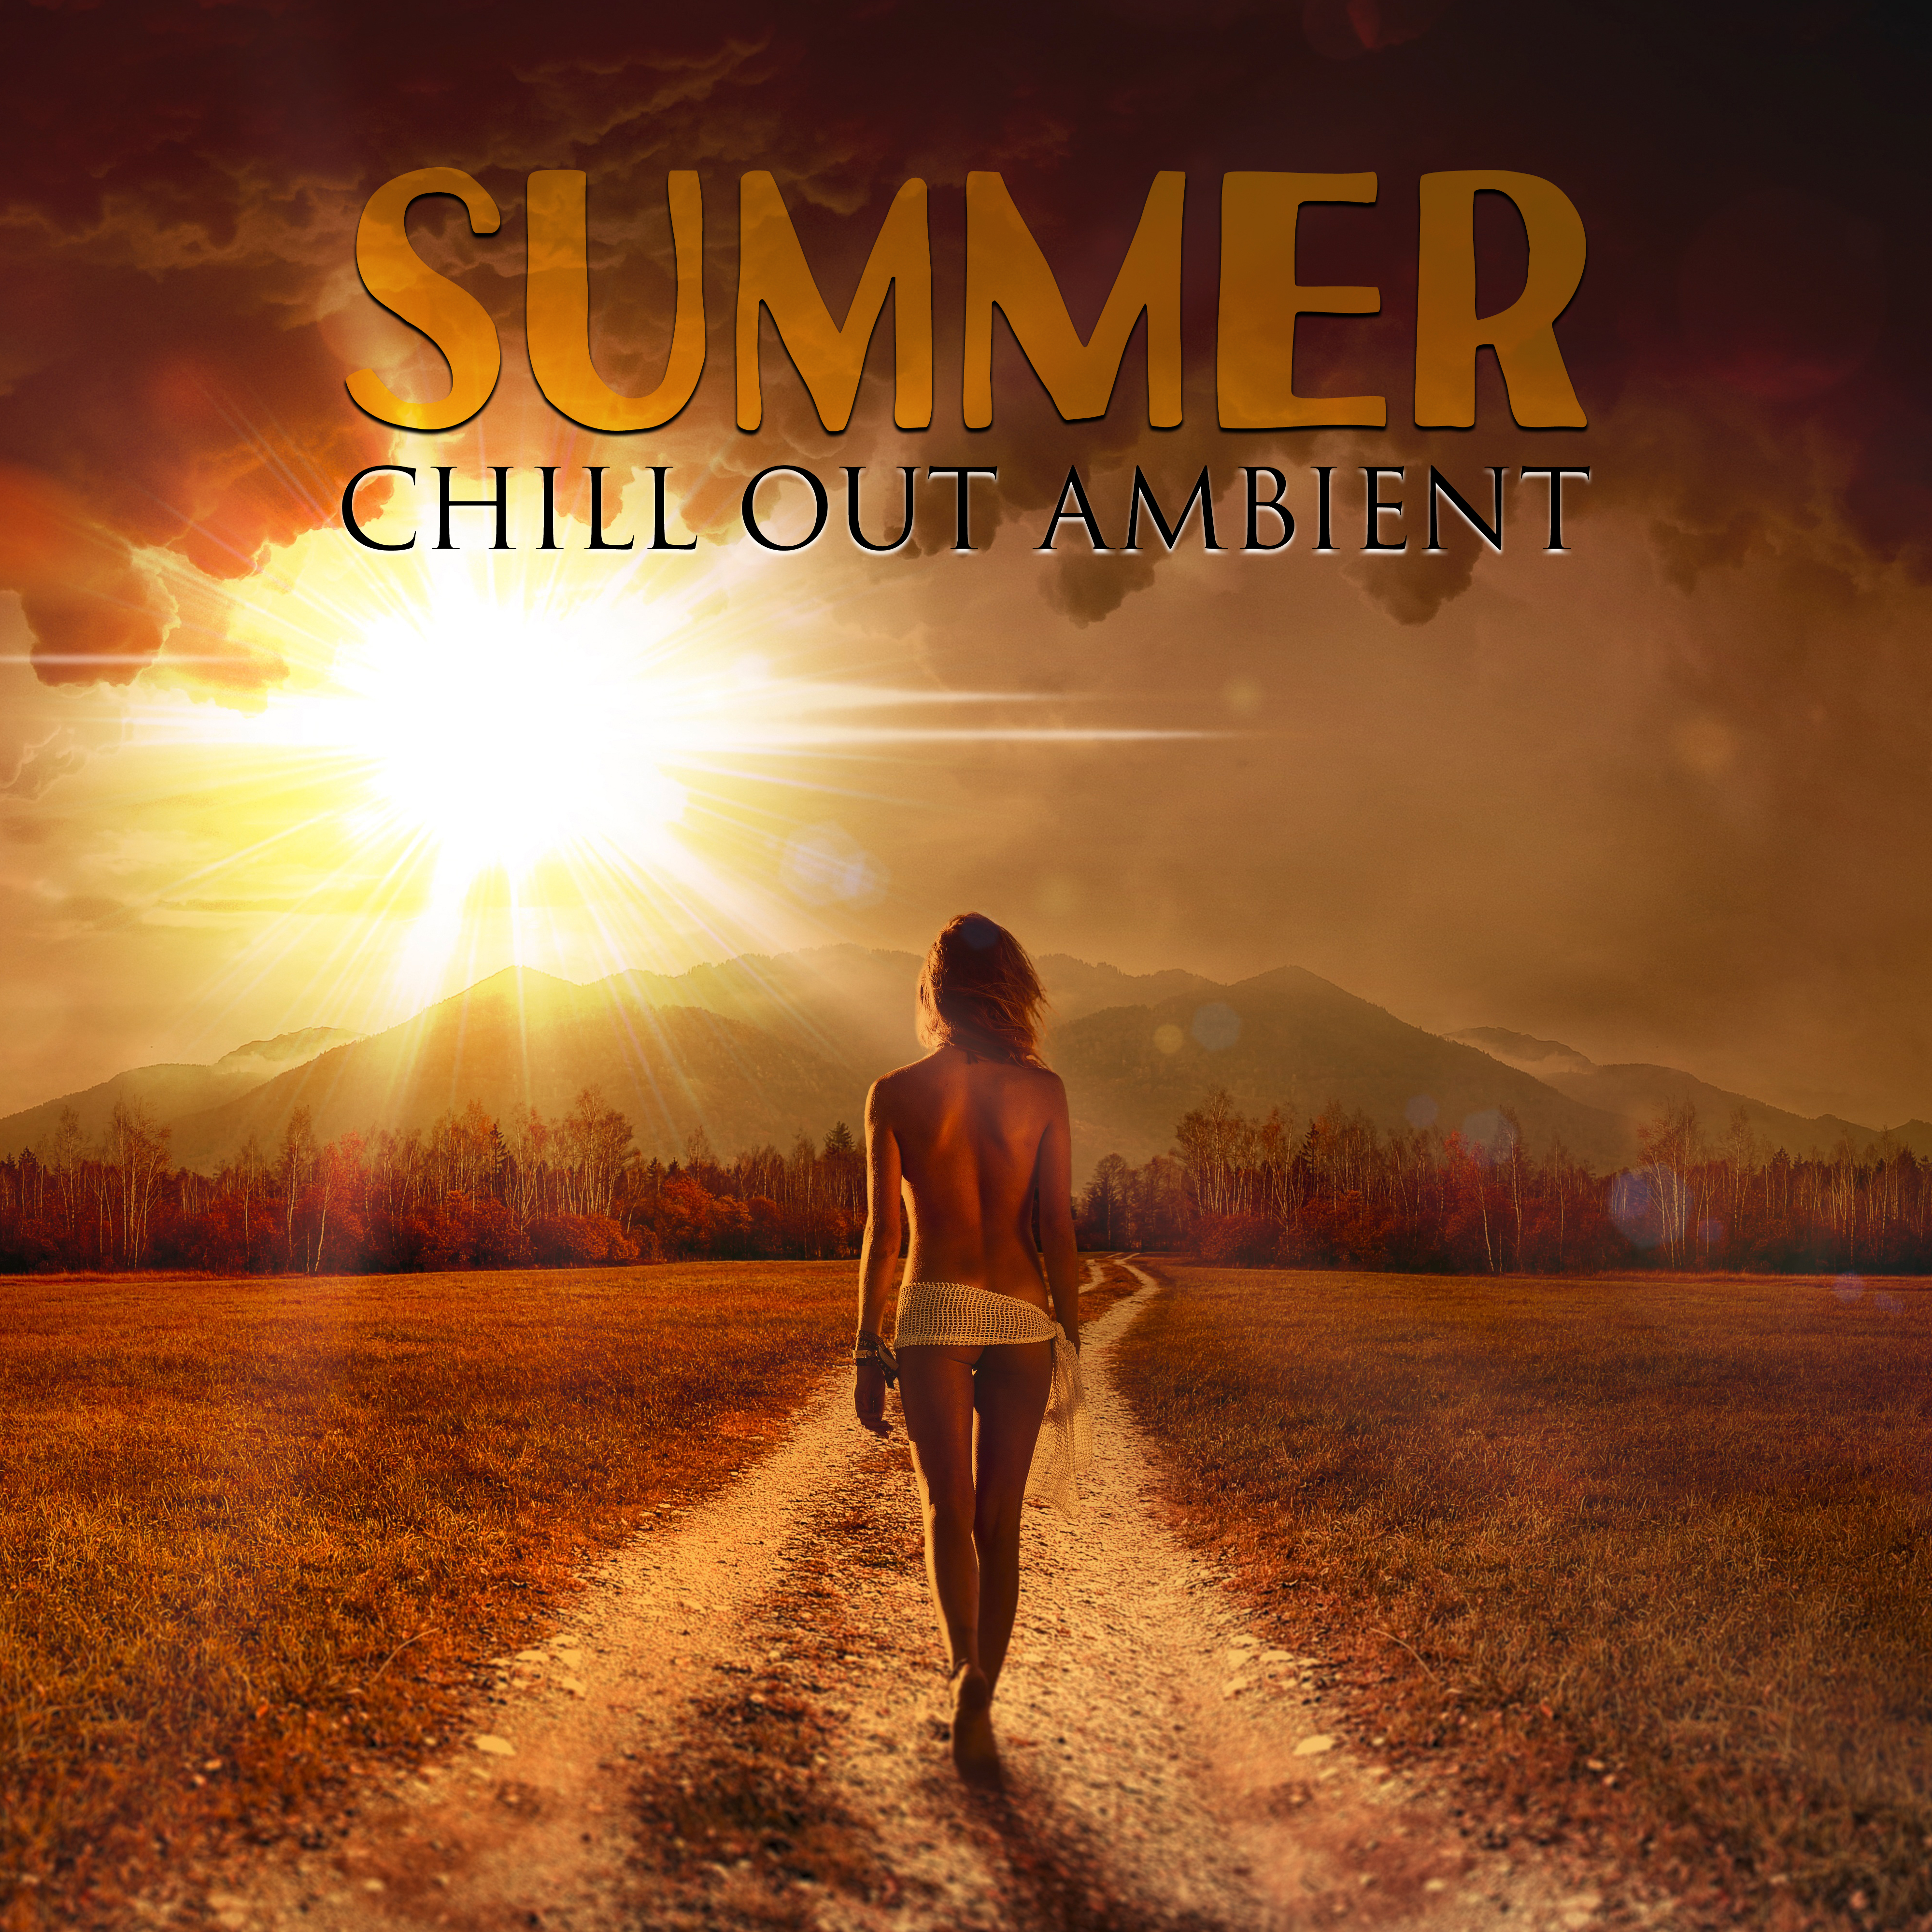 Summer Chill Out Ambient  Calm Sounds to Relax, Easy Listening, Peaceful Mind, Stress Free